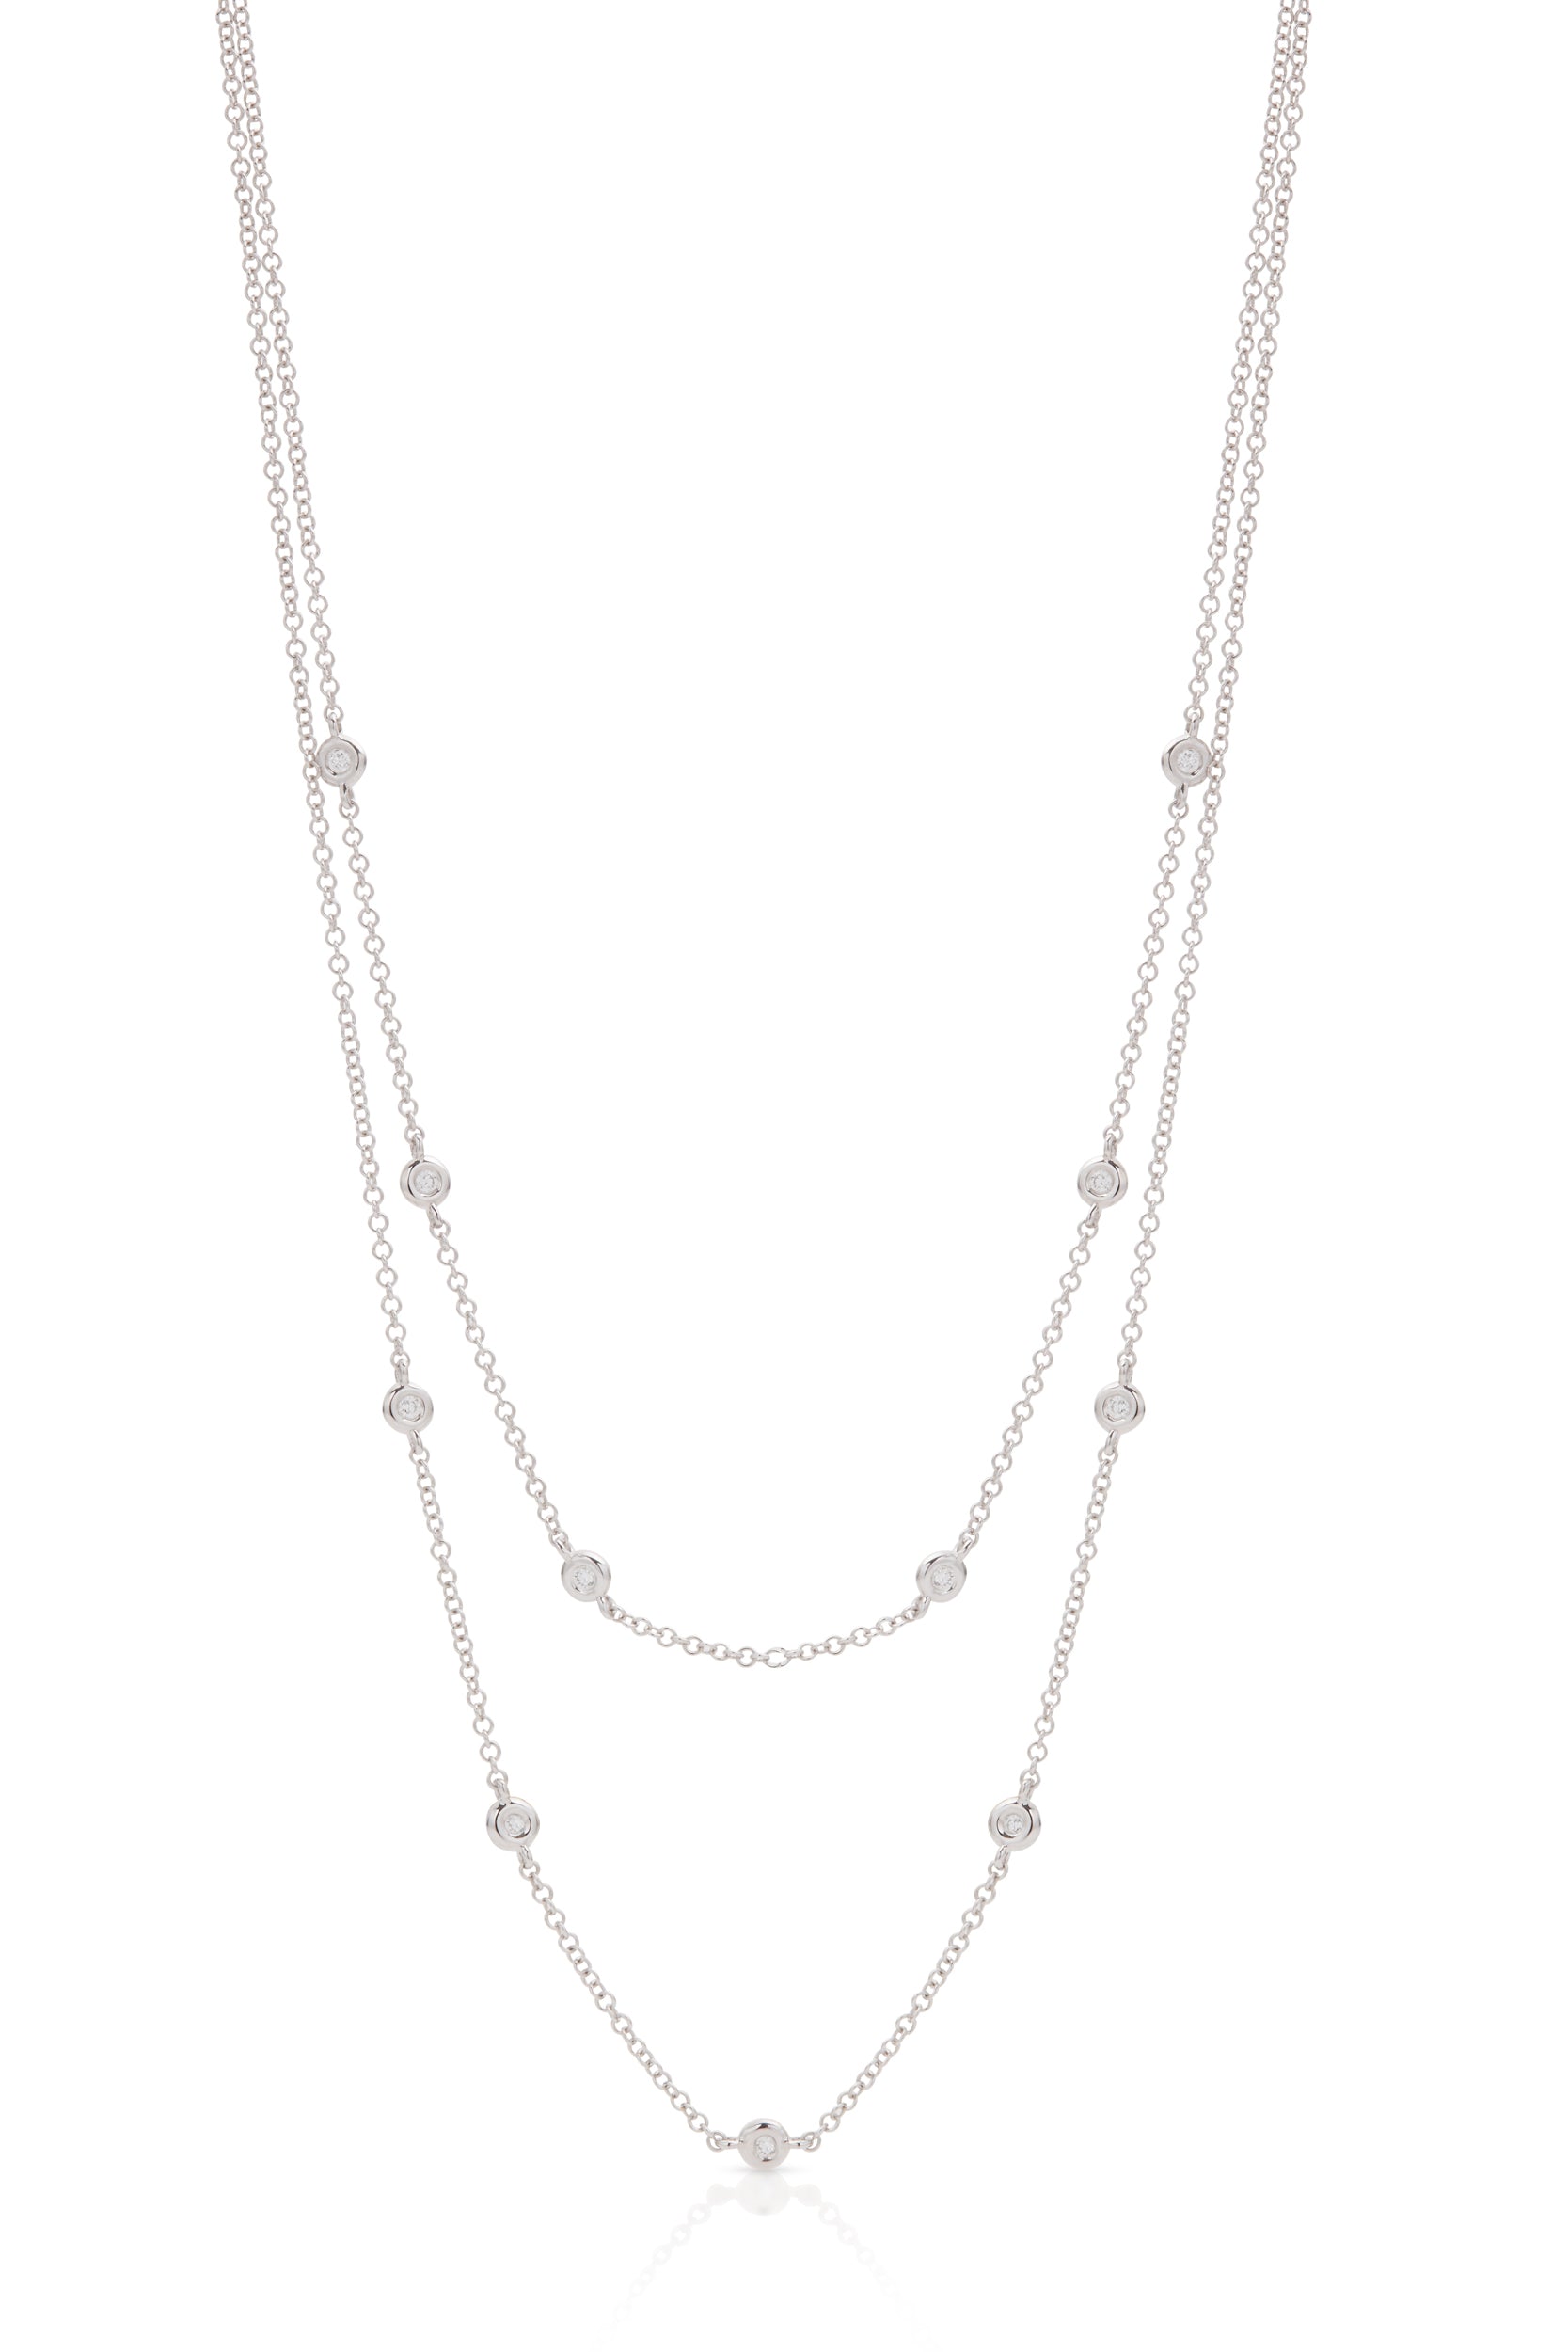 14KW Diamond By The Yard Double Layered Necklace